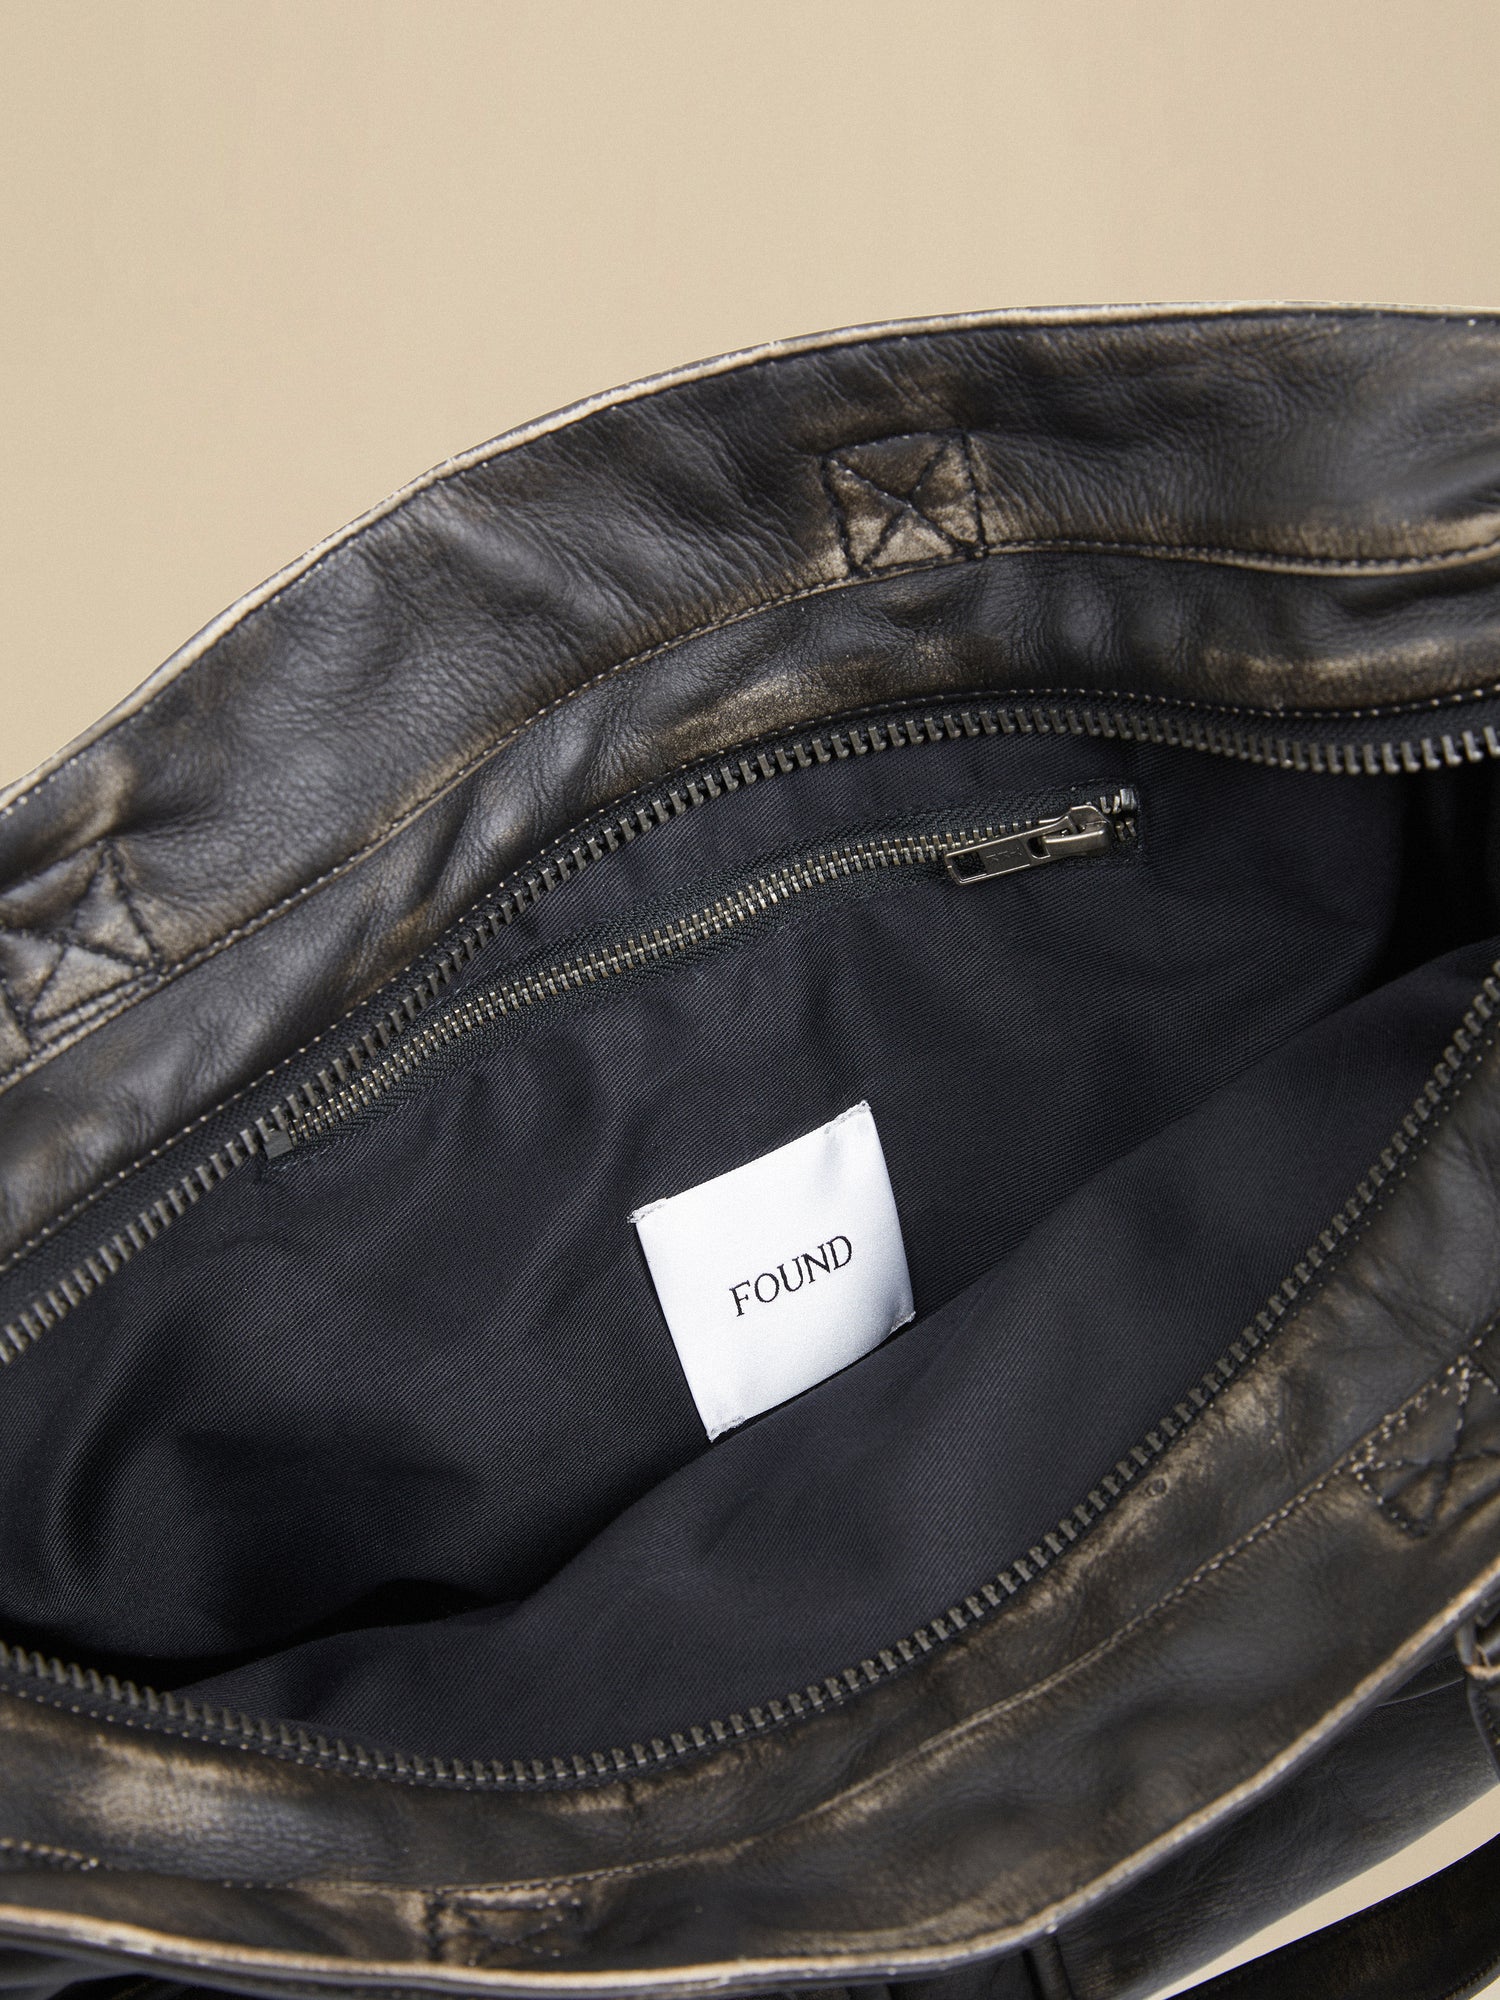 A Profound Hana distressed black leather bag with a label on it, crafted from premium distressed leather.